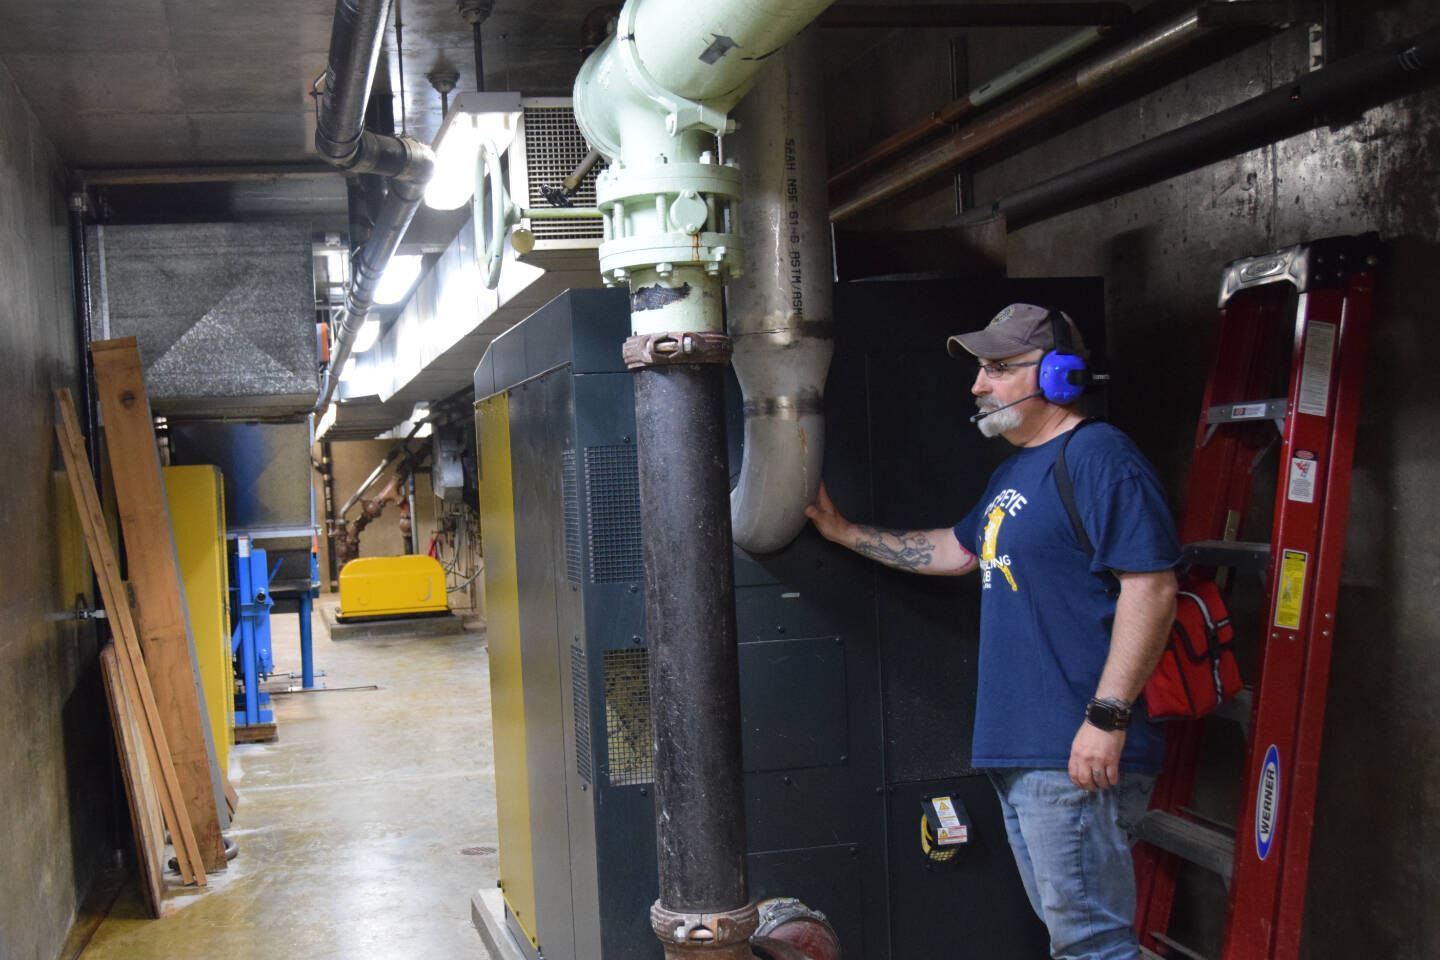 Superintendent Todd Cook explains the capabilities of the newly-installed blowers compared to the old units at the Homer Sewer Treatment Plant on Thursday, July 27, 2023 in Homer, Alaska. (Delcenia Cosman/Homer News)